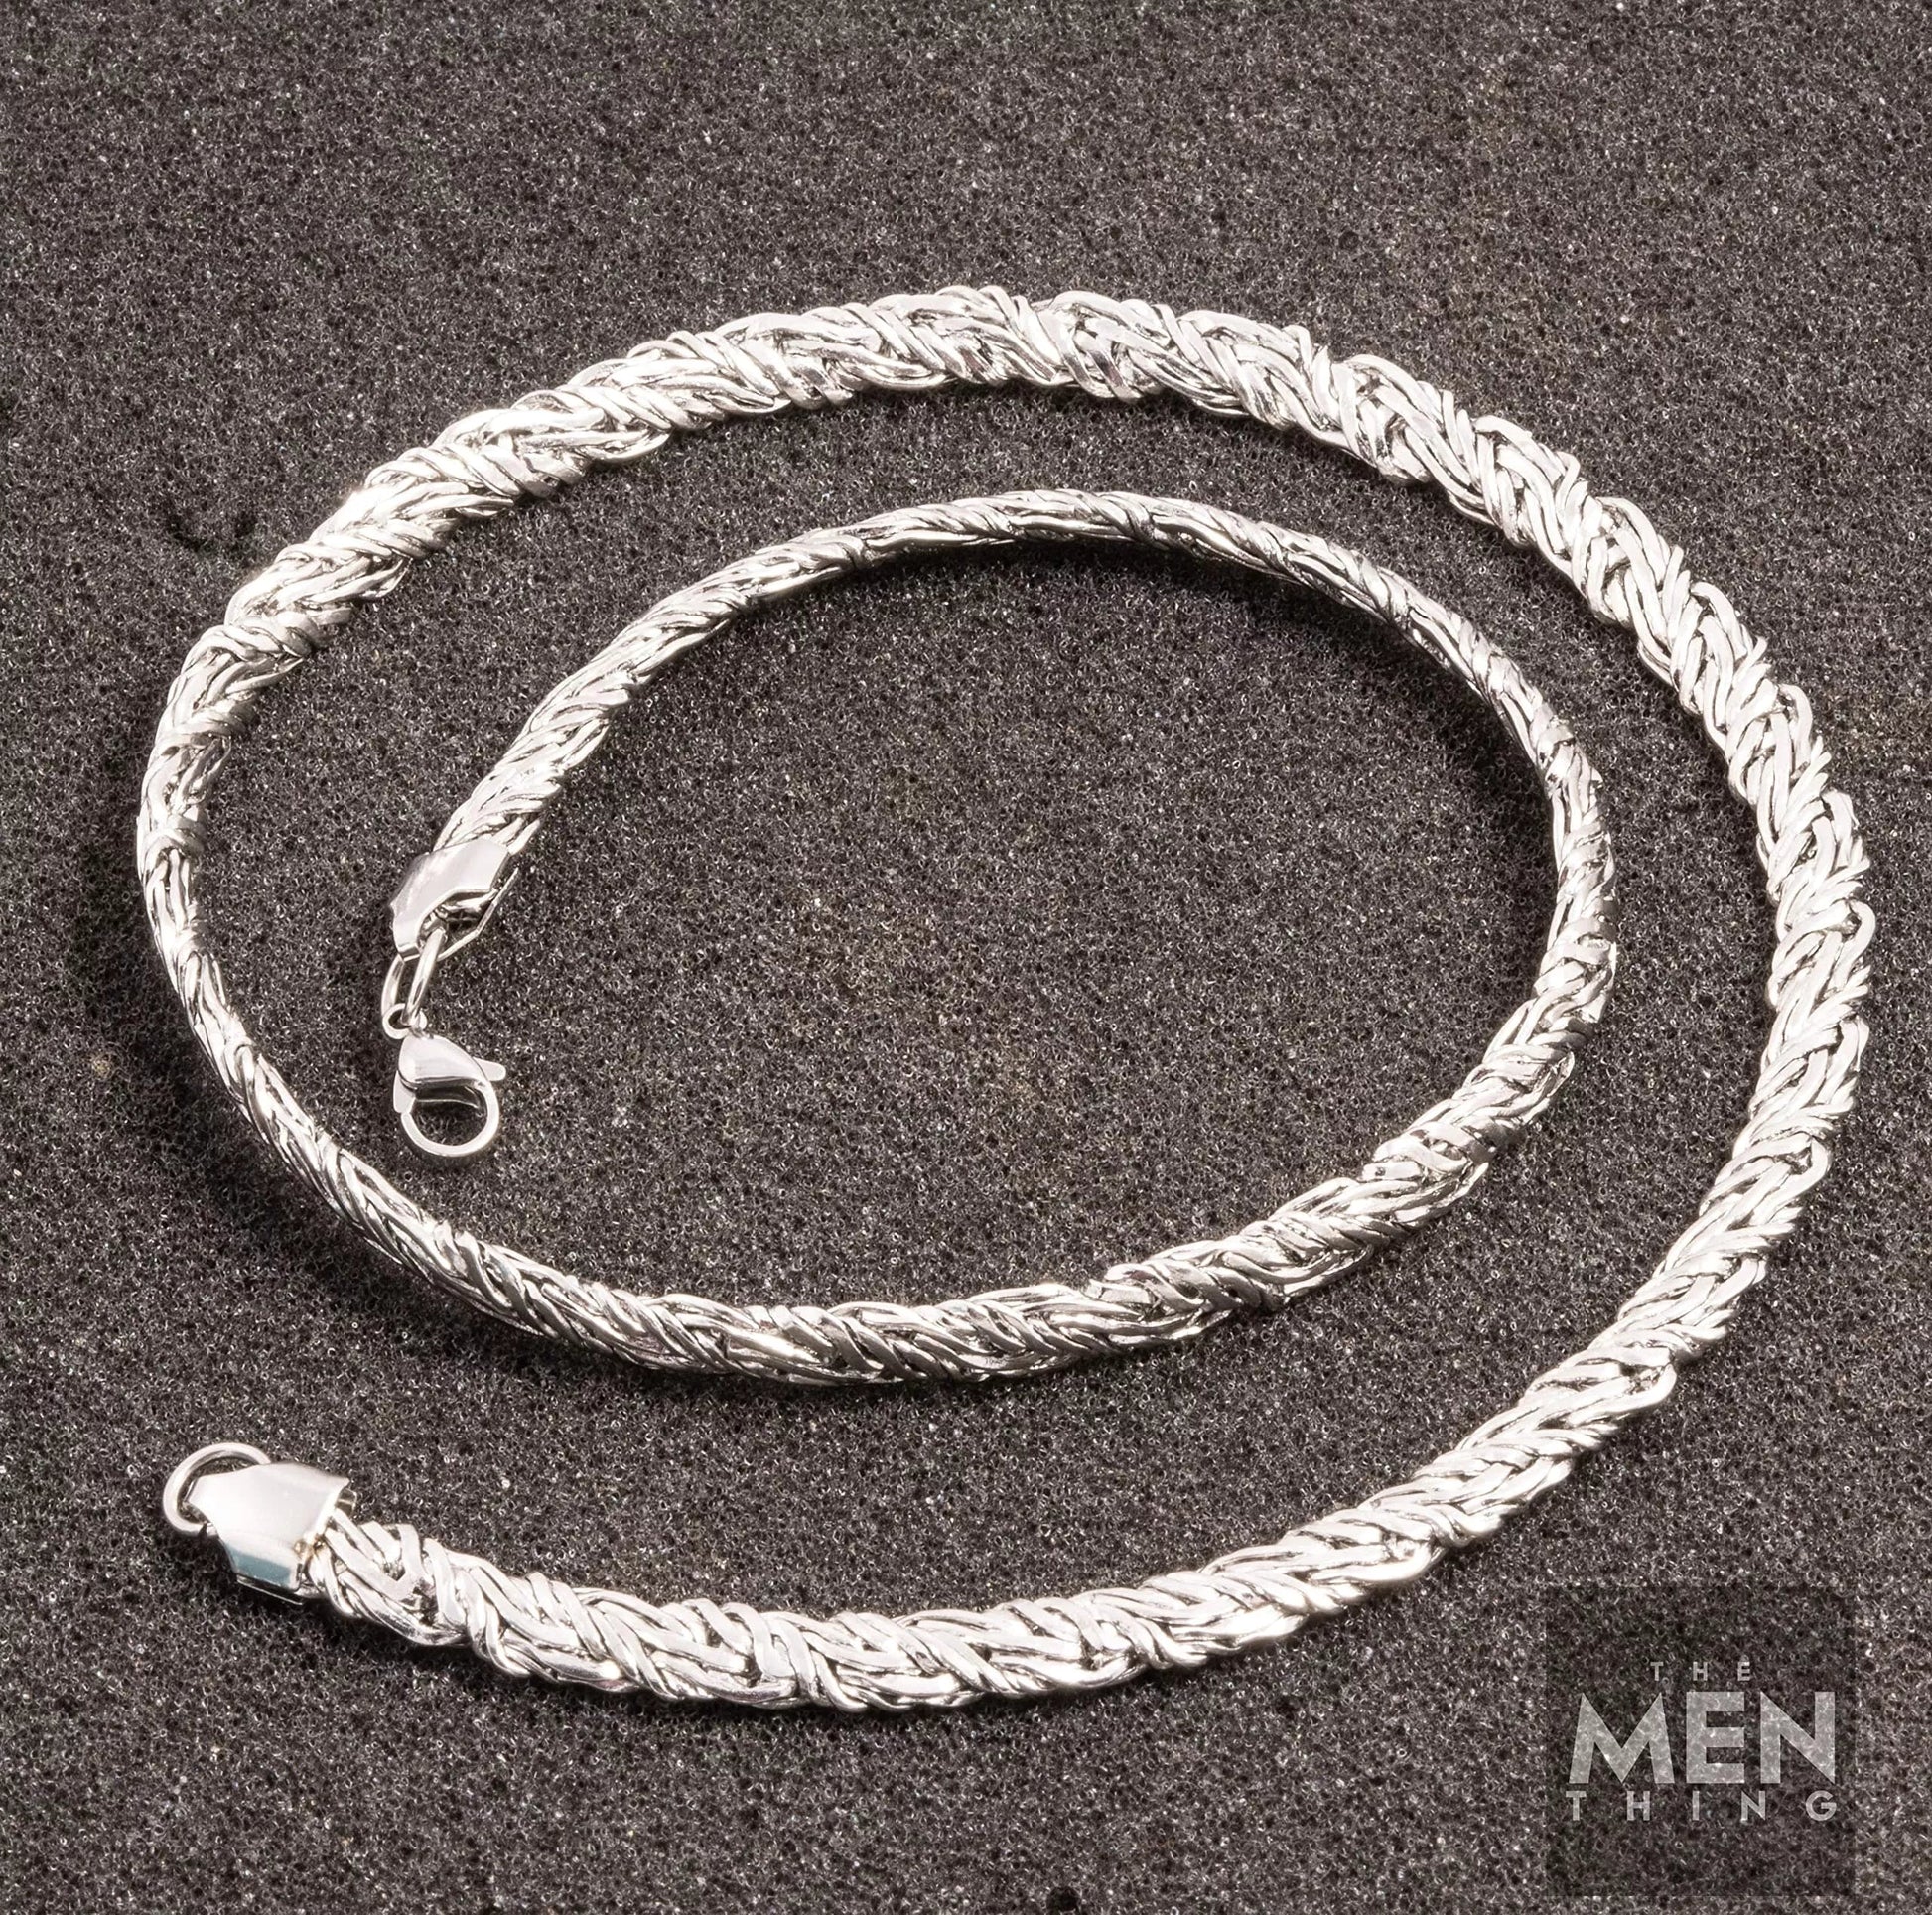 THE MEN THING Chain for Men - 6mm Twisted Curb Chain Silver Stainless Steel 21.5inch for Men & Boys